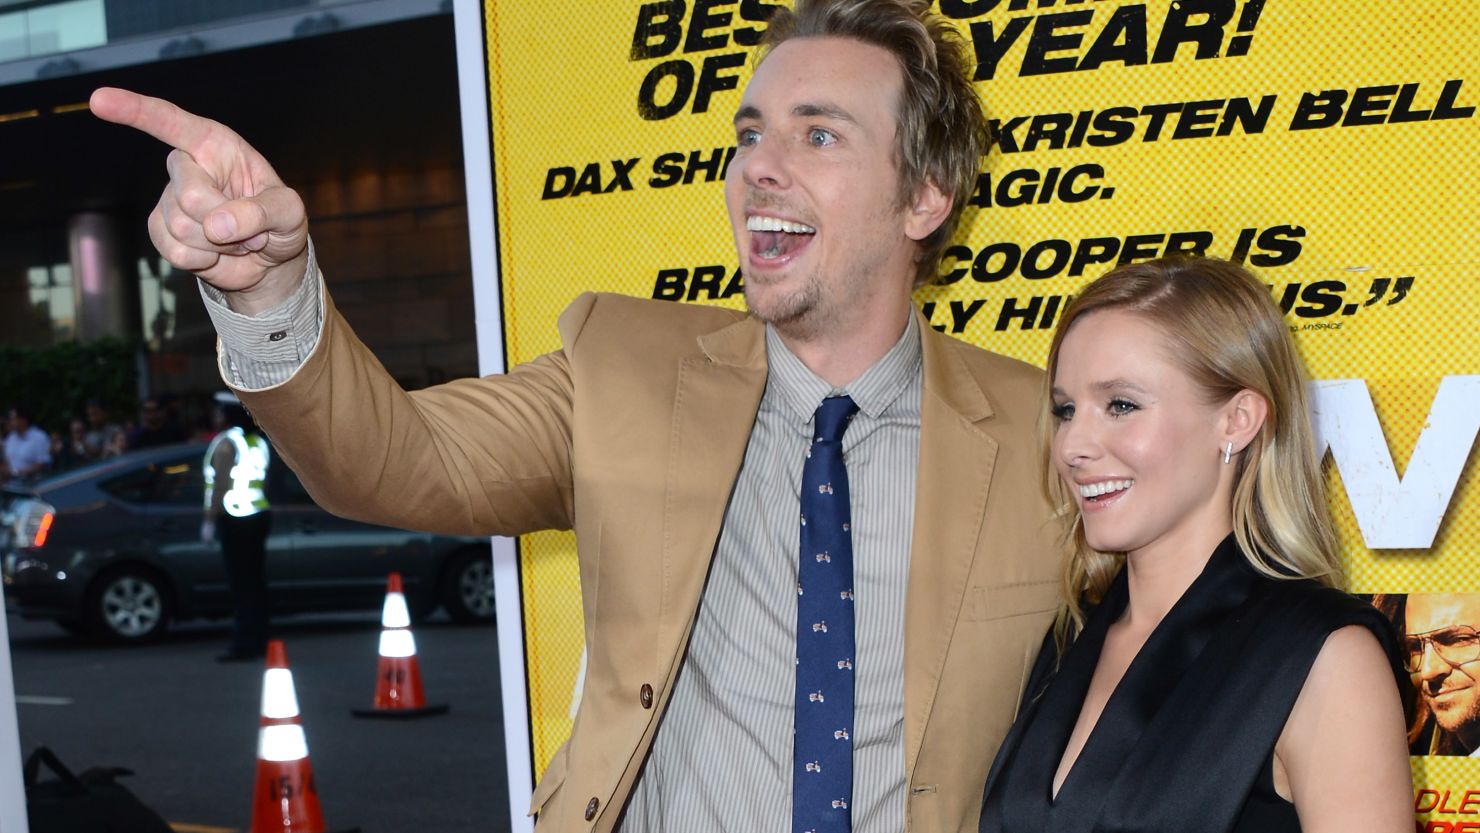 Dax Shepard and Kristen Bell married in 2013 and have two daughters.